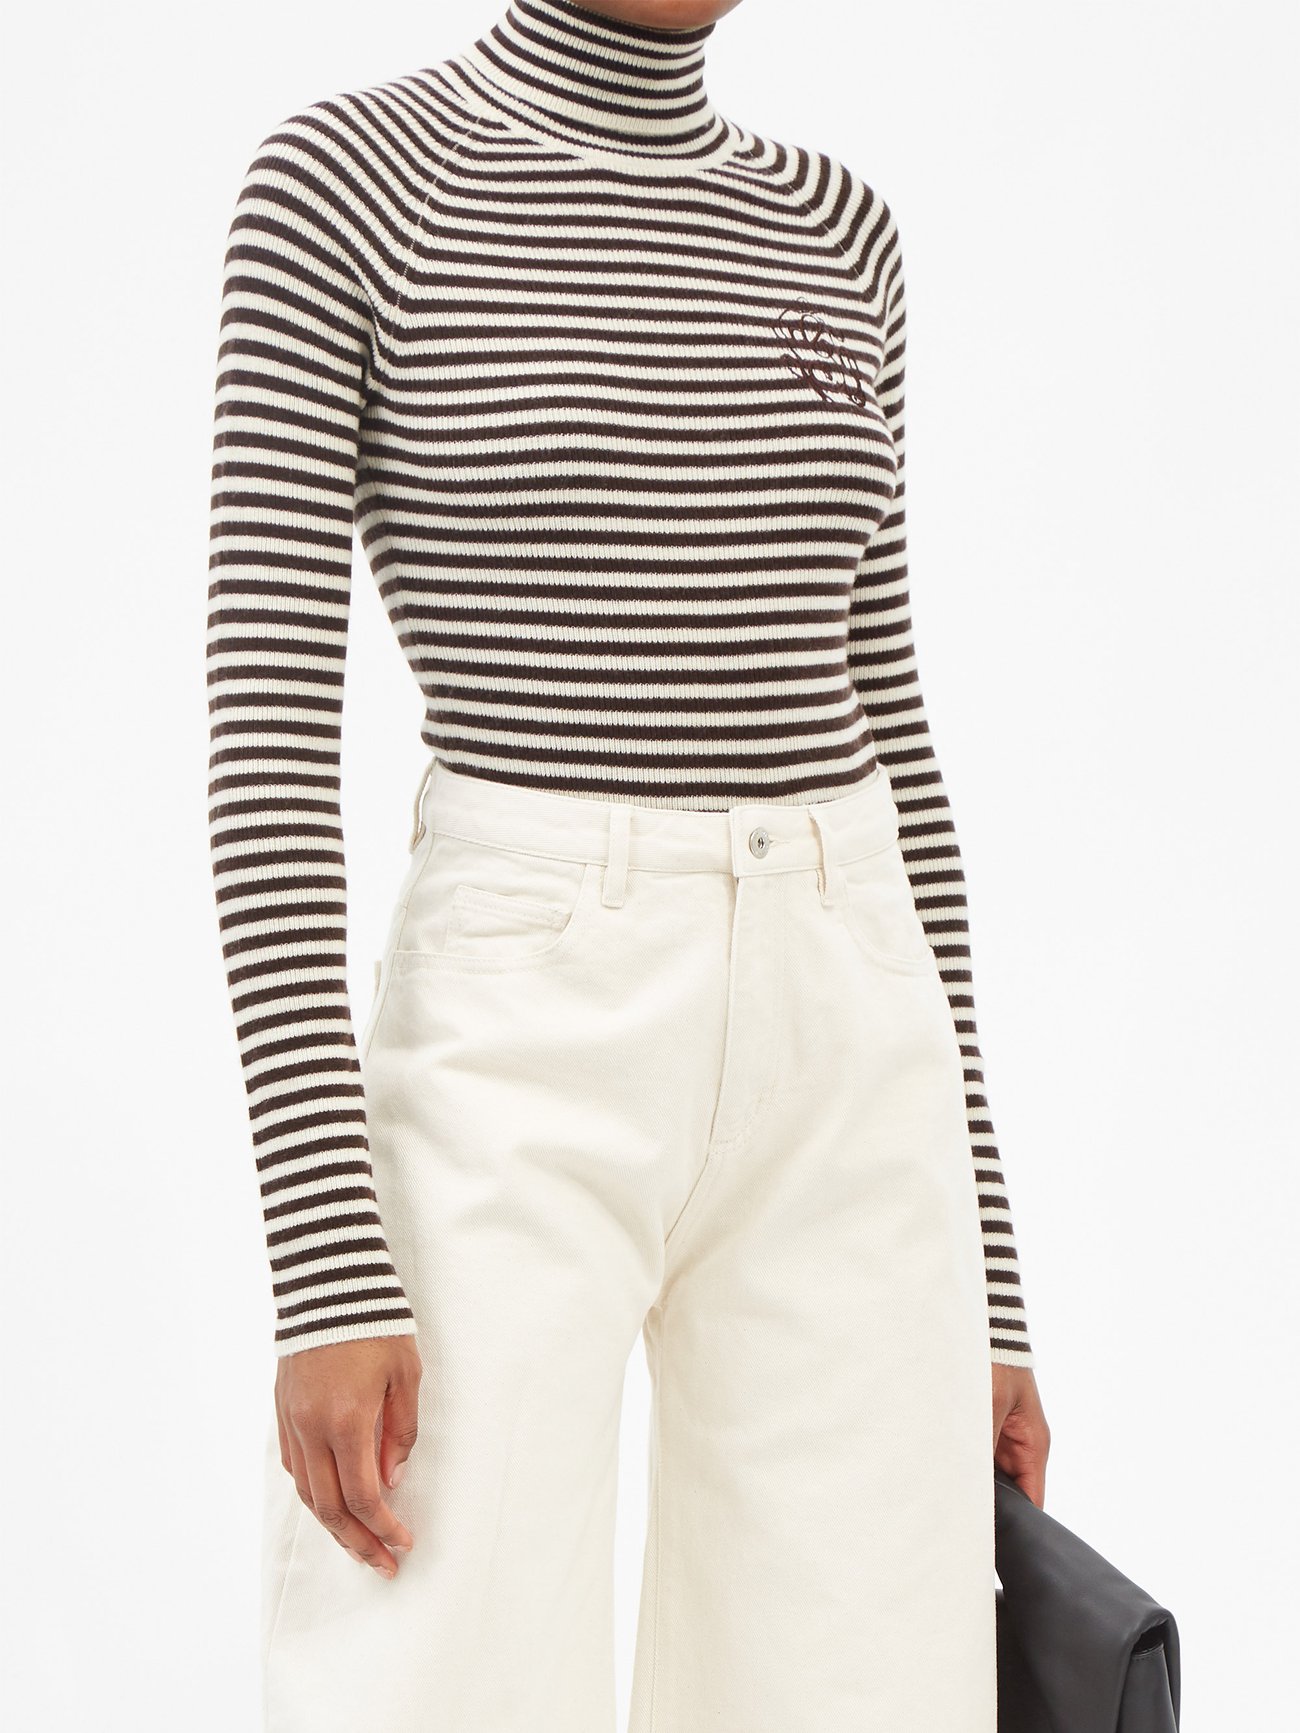 Ganni black cashmere-merino sweater is punctuated with white stripes featuring a roll neckline and raglan sleeves, capturing Detti Reffstrup’s Scandi-cool aesthetic.